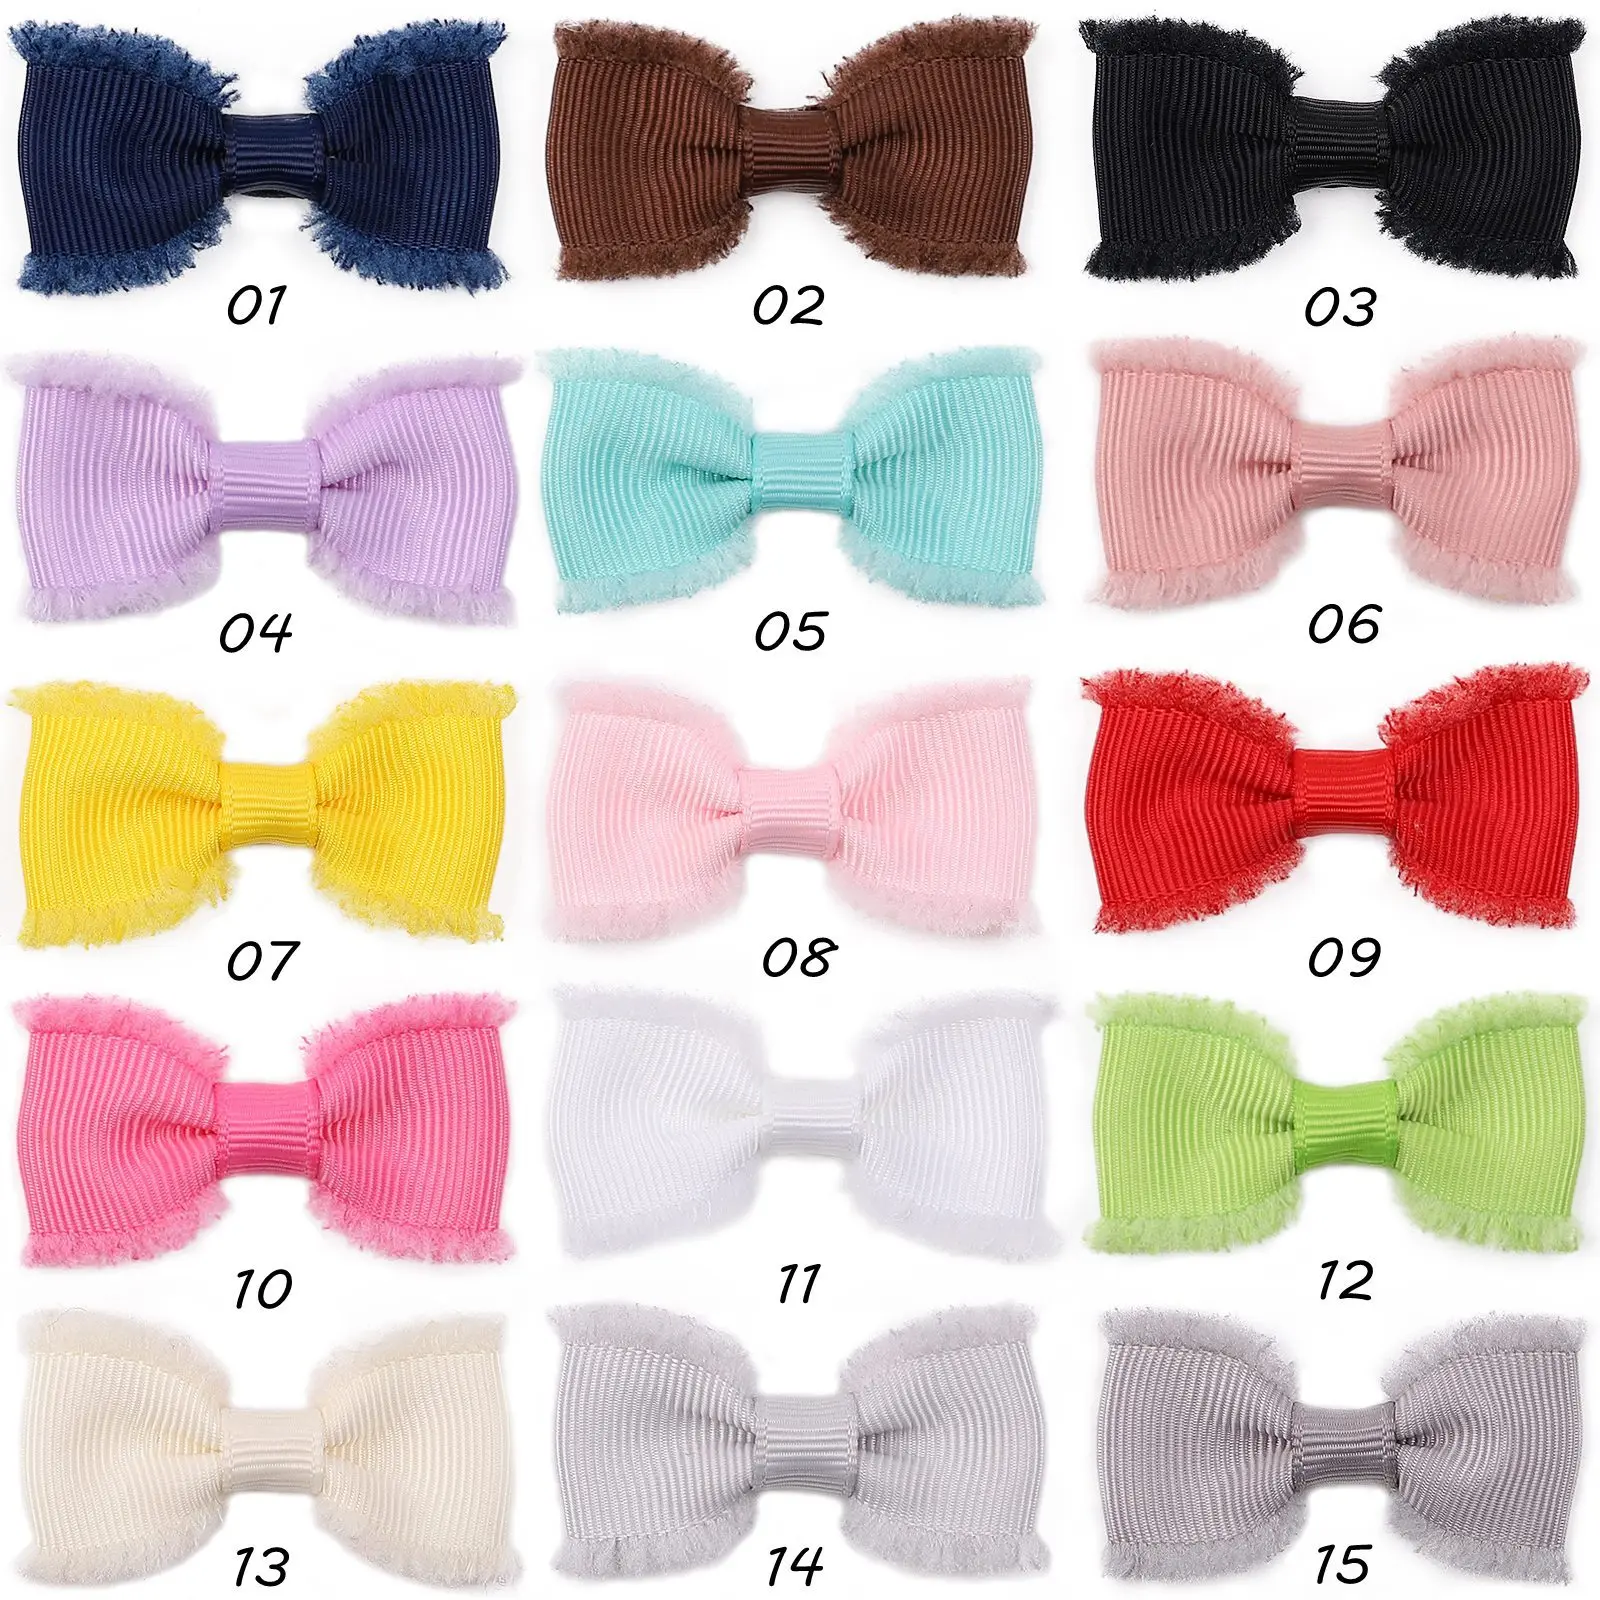 

120pc/lot 2021 New 2inch Baby Girls Grosgrain Ribbon Bows Hair Clips Kids Solid Bow Hairpins Barrettes Children Hair Accessories